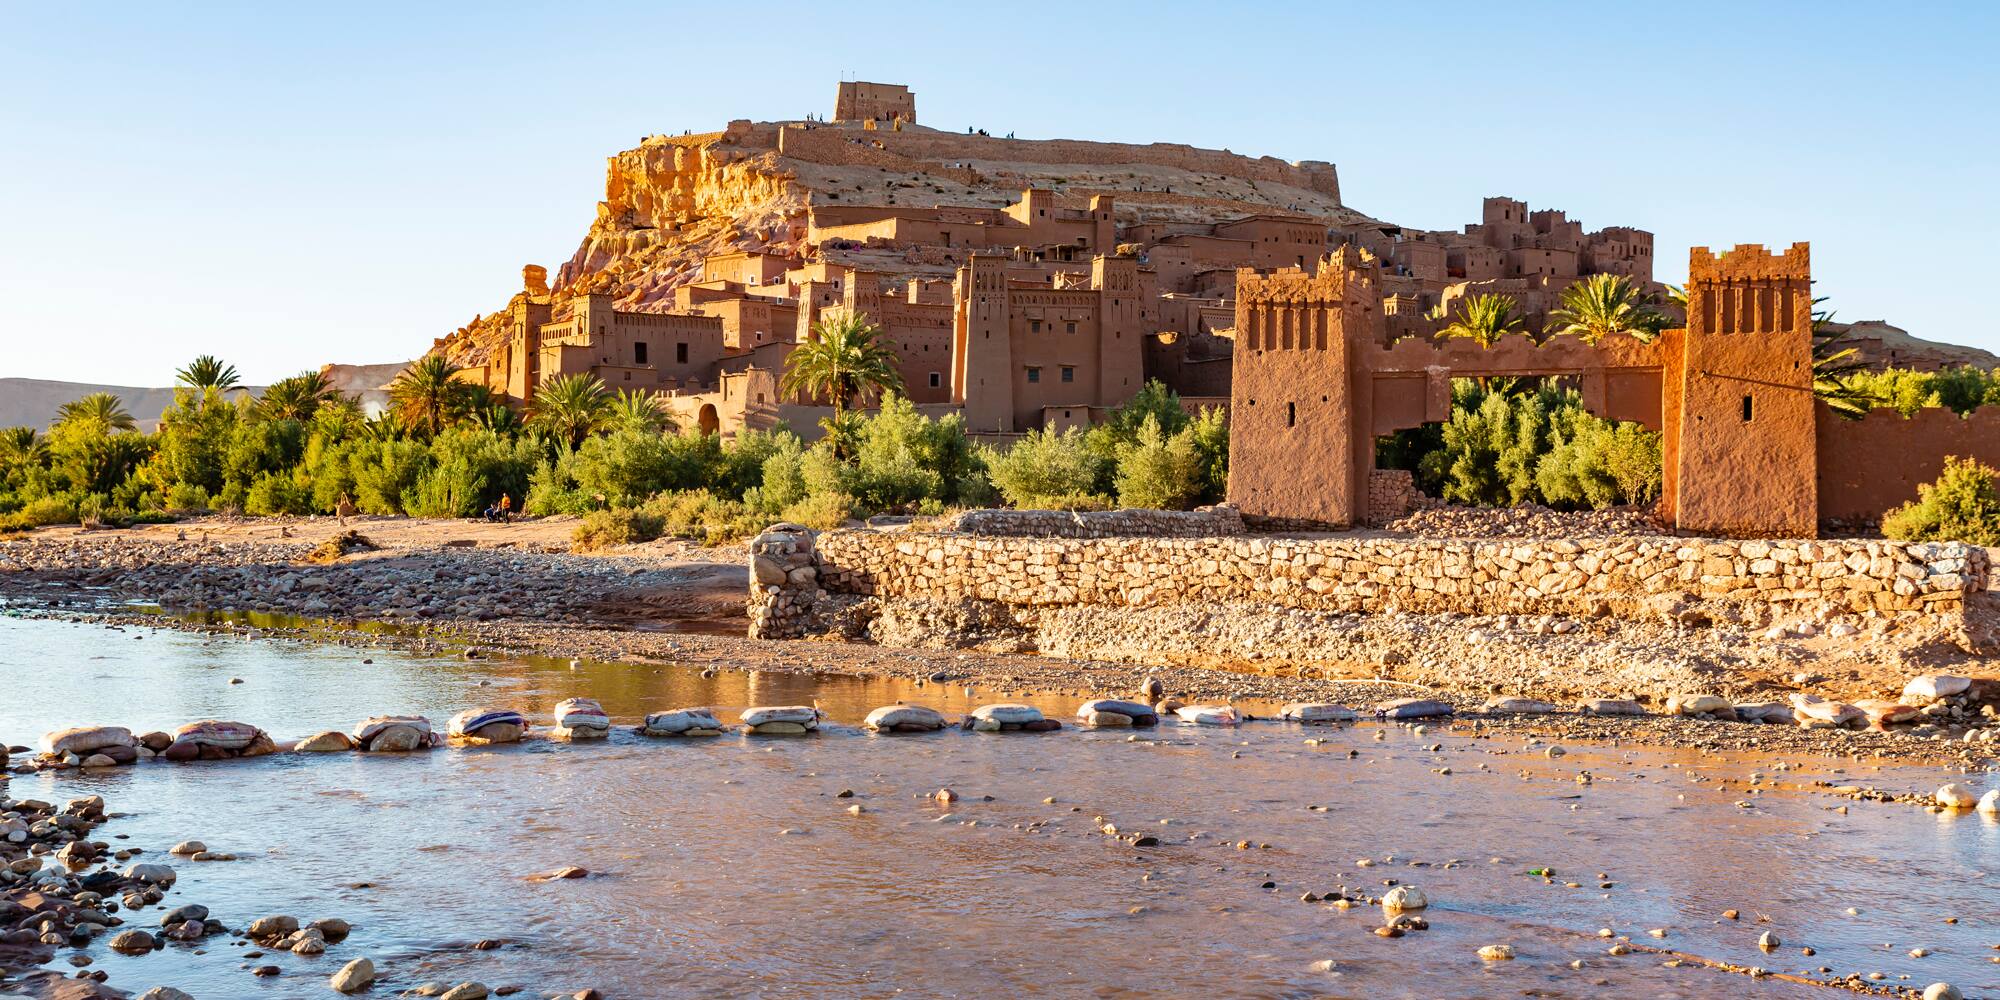 Morocco: Oasis on the front line of climate change, Environment News